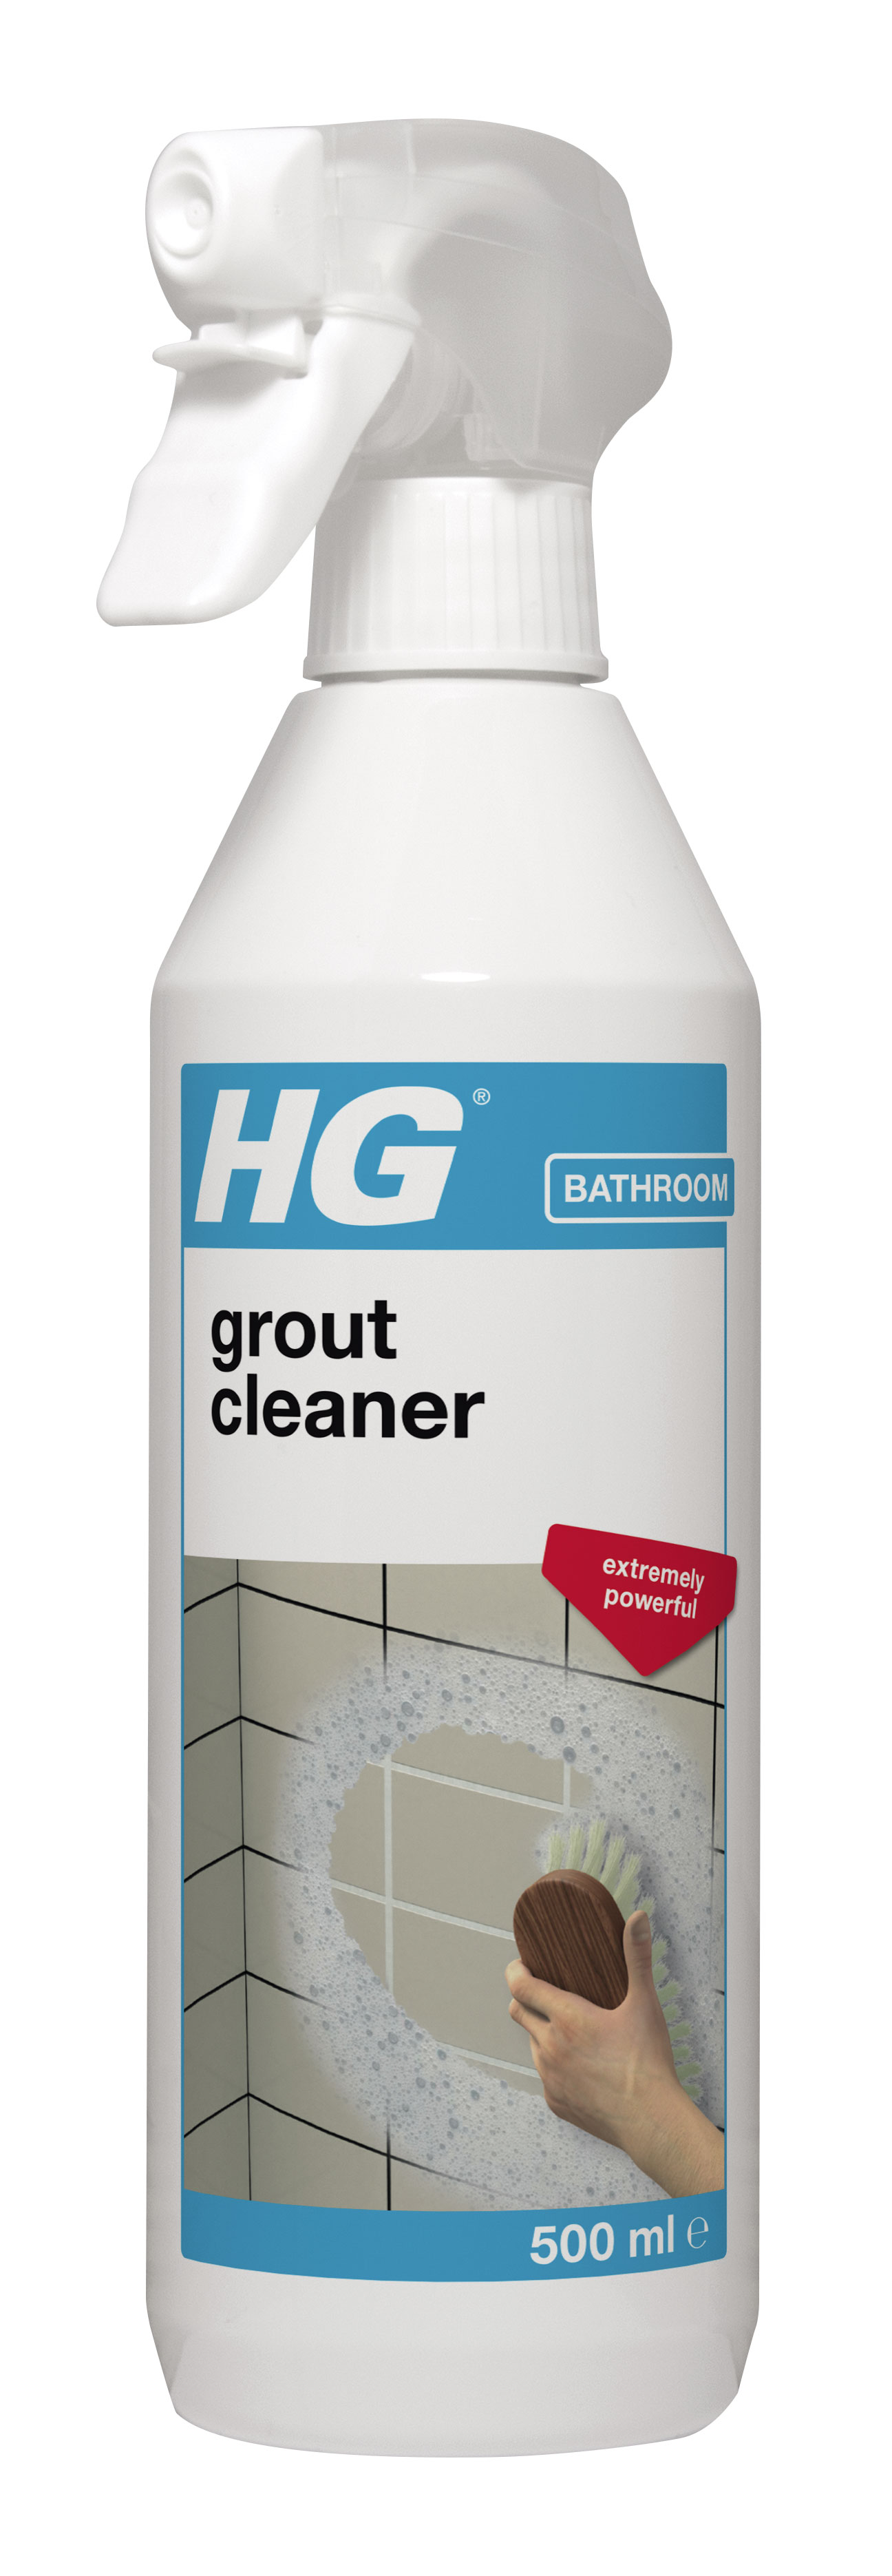 HG GROUT CLEANER READY TO USE